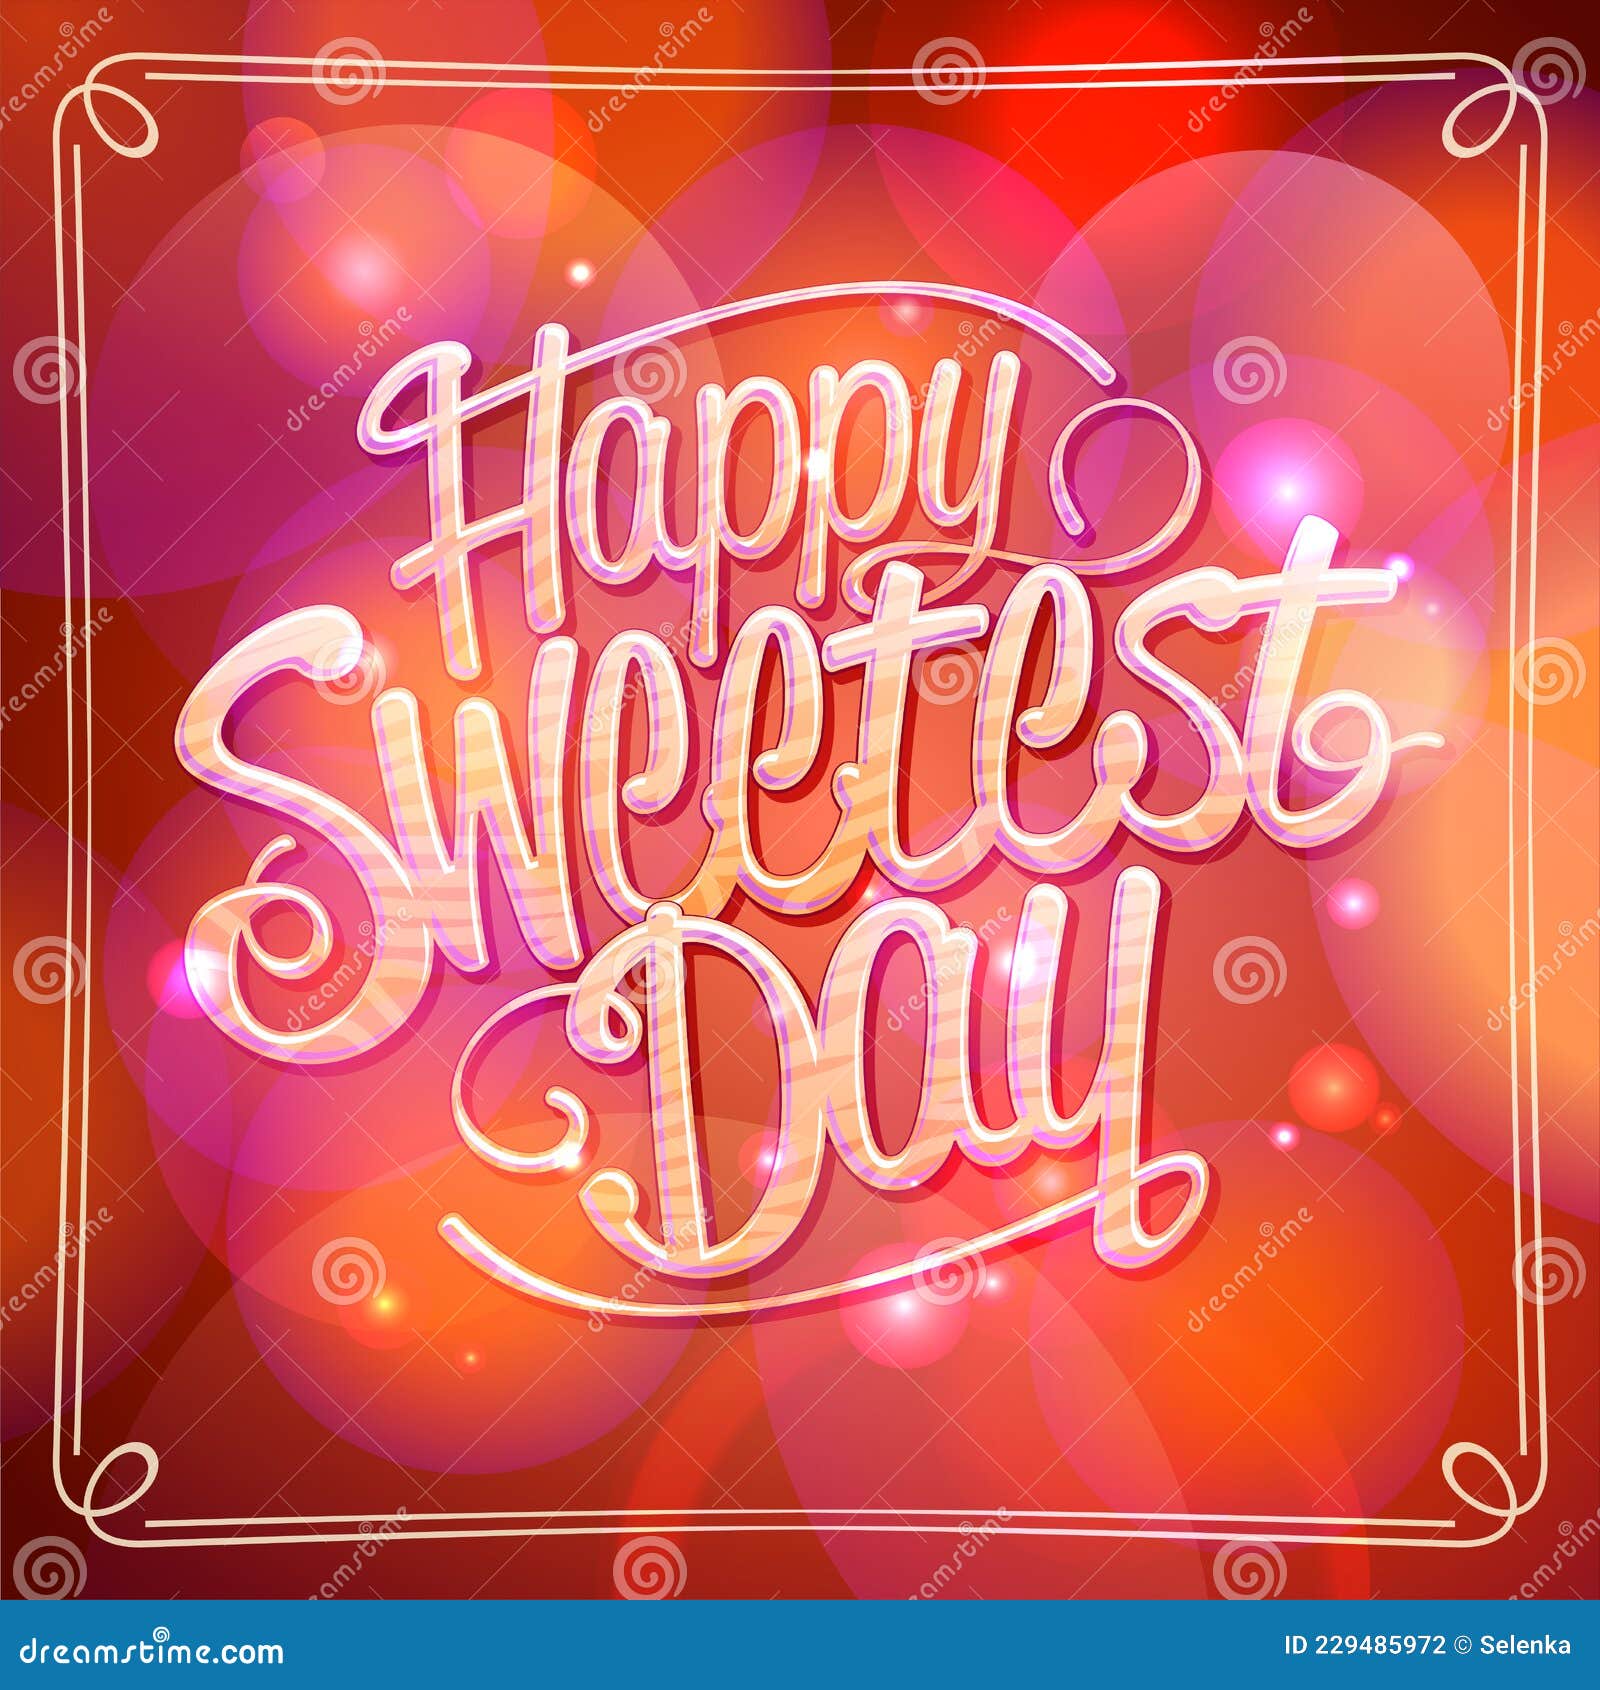 Happy Sweetest Day Card Vector Template with Golden Lettering Stock